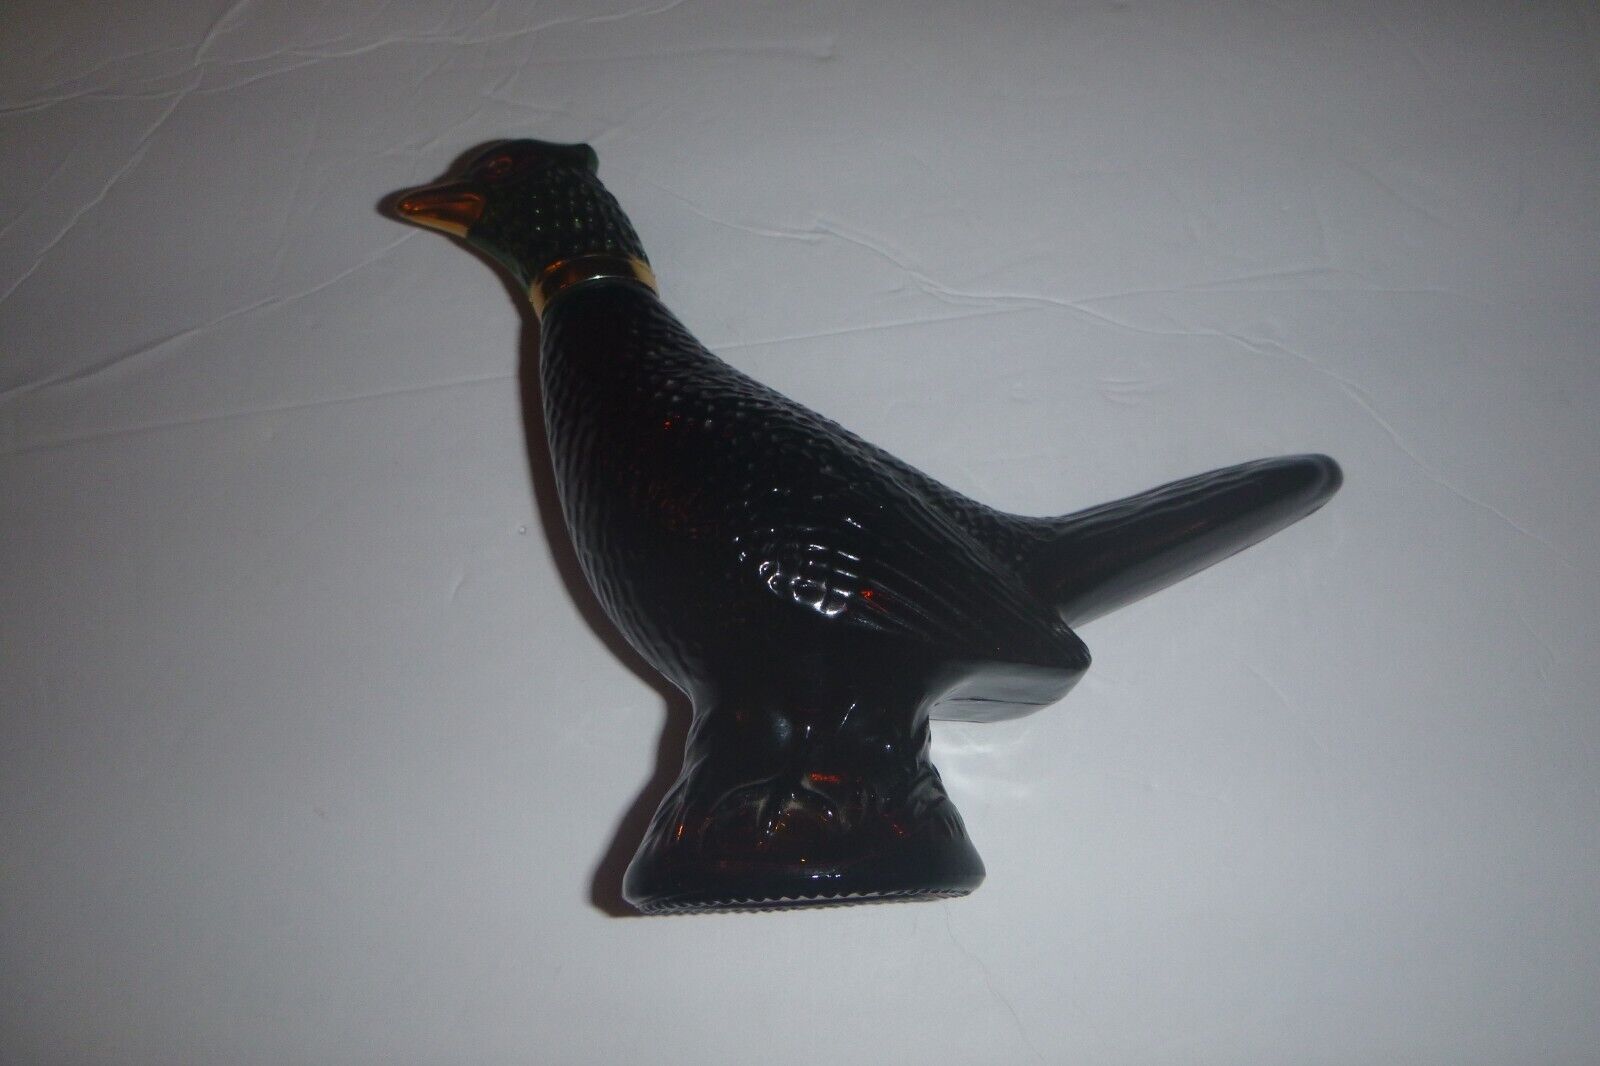 Avon Pheasant Decanter 5FL Oland After Shave Mostly Full